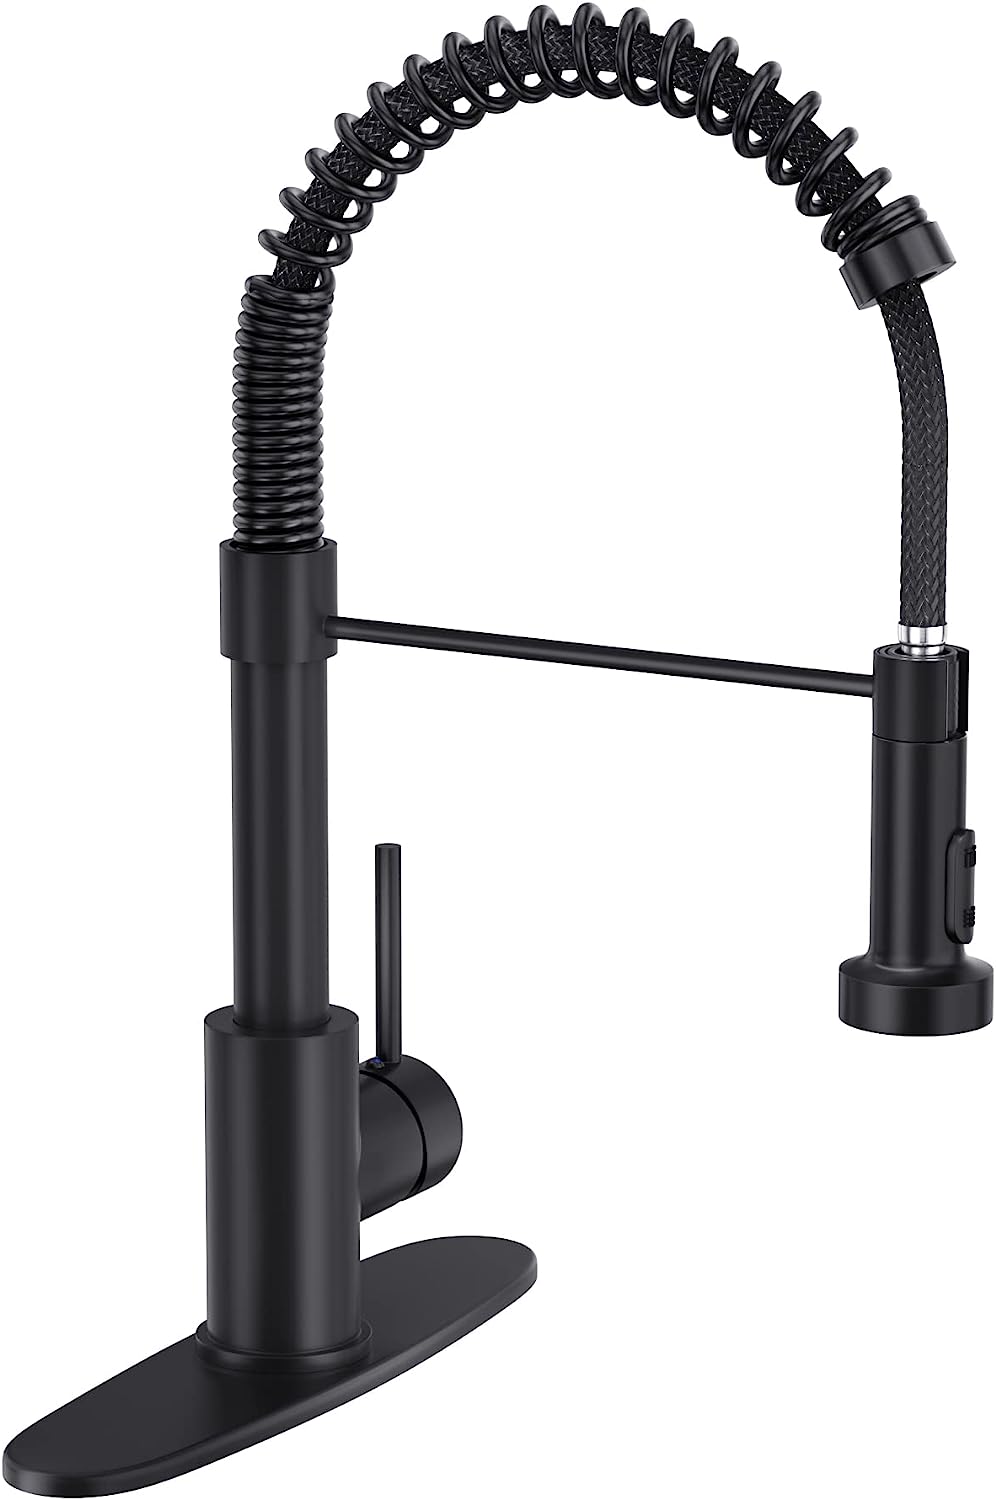 BASDEHEN Kitchen Faucets with Pull Down Sprayer, Black [...]